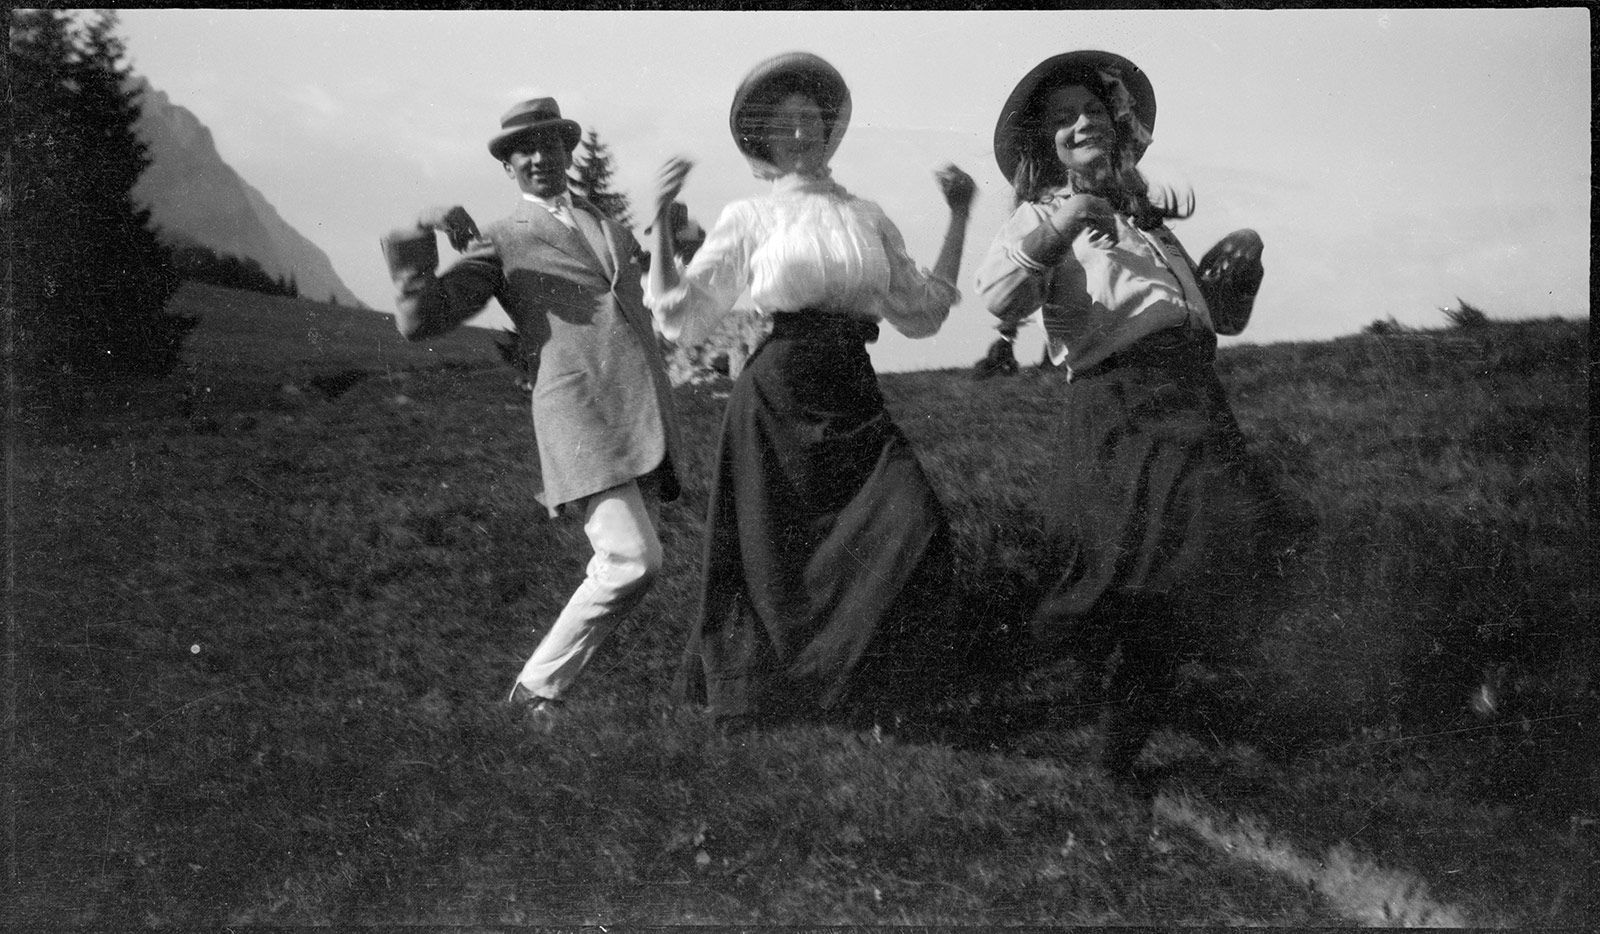 Young people dancing on a meadow, 1900-1910, Collection of Mihai and Anca Oroveanu, Bucharest, Romania.